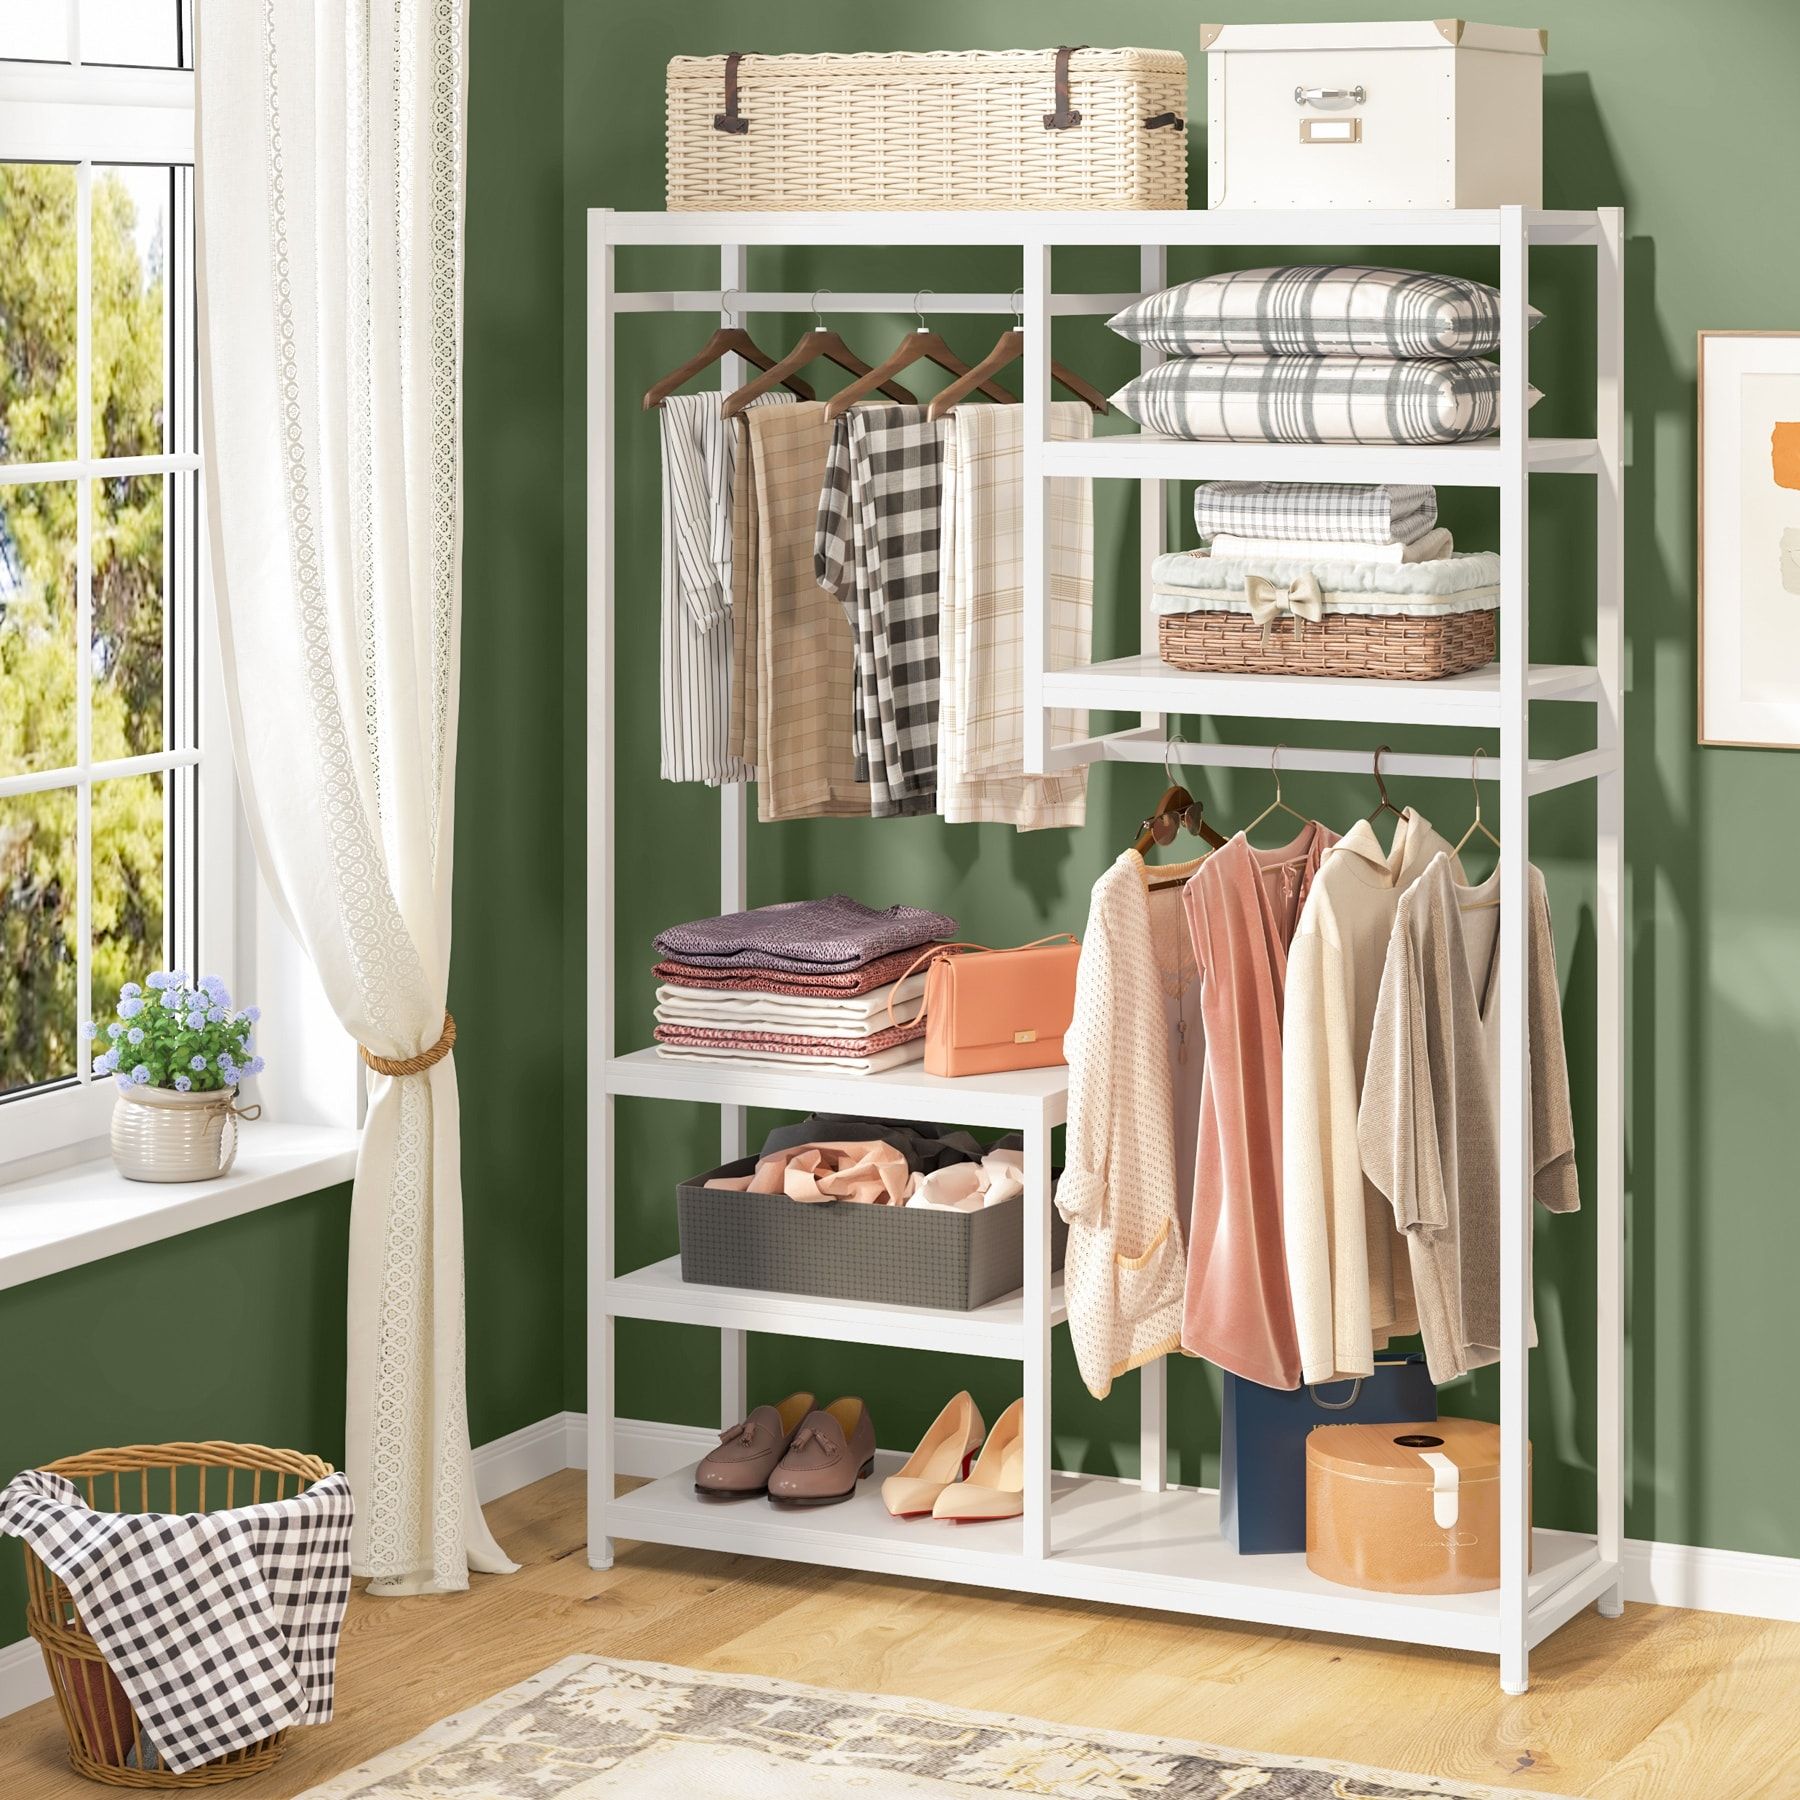 Free Standing Closet Organizer Double Hanging Rod Clothes Garment Racks –  Bed Bath & Beyond – 30537676 With Regard To Wardrobes With 3 Hanging Rod (View 8 of 15)